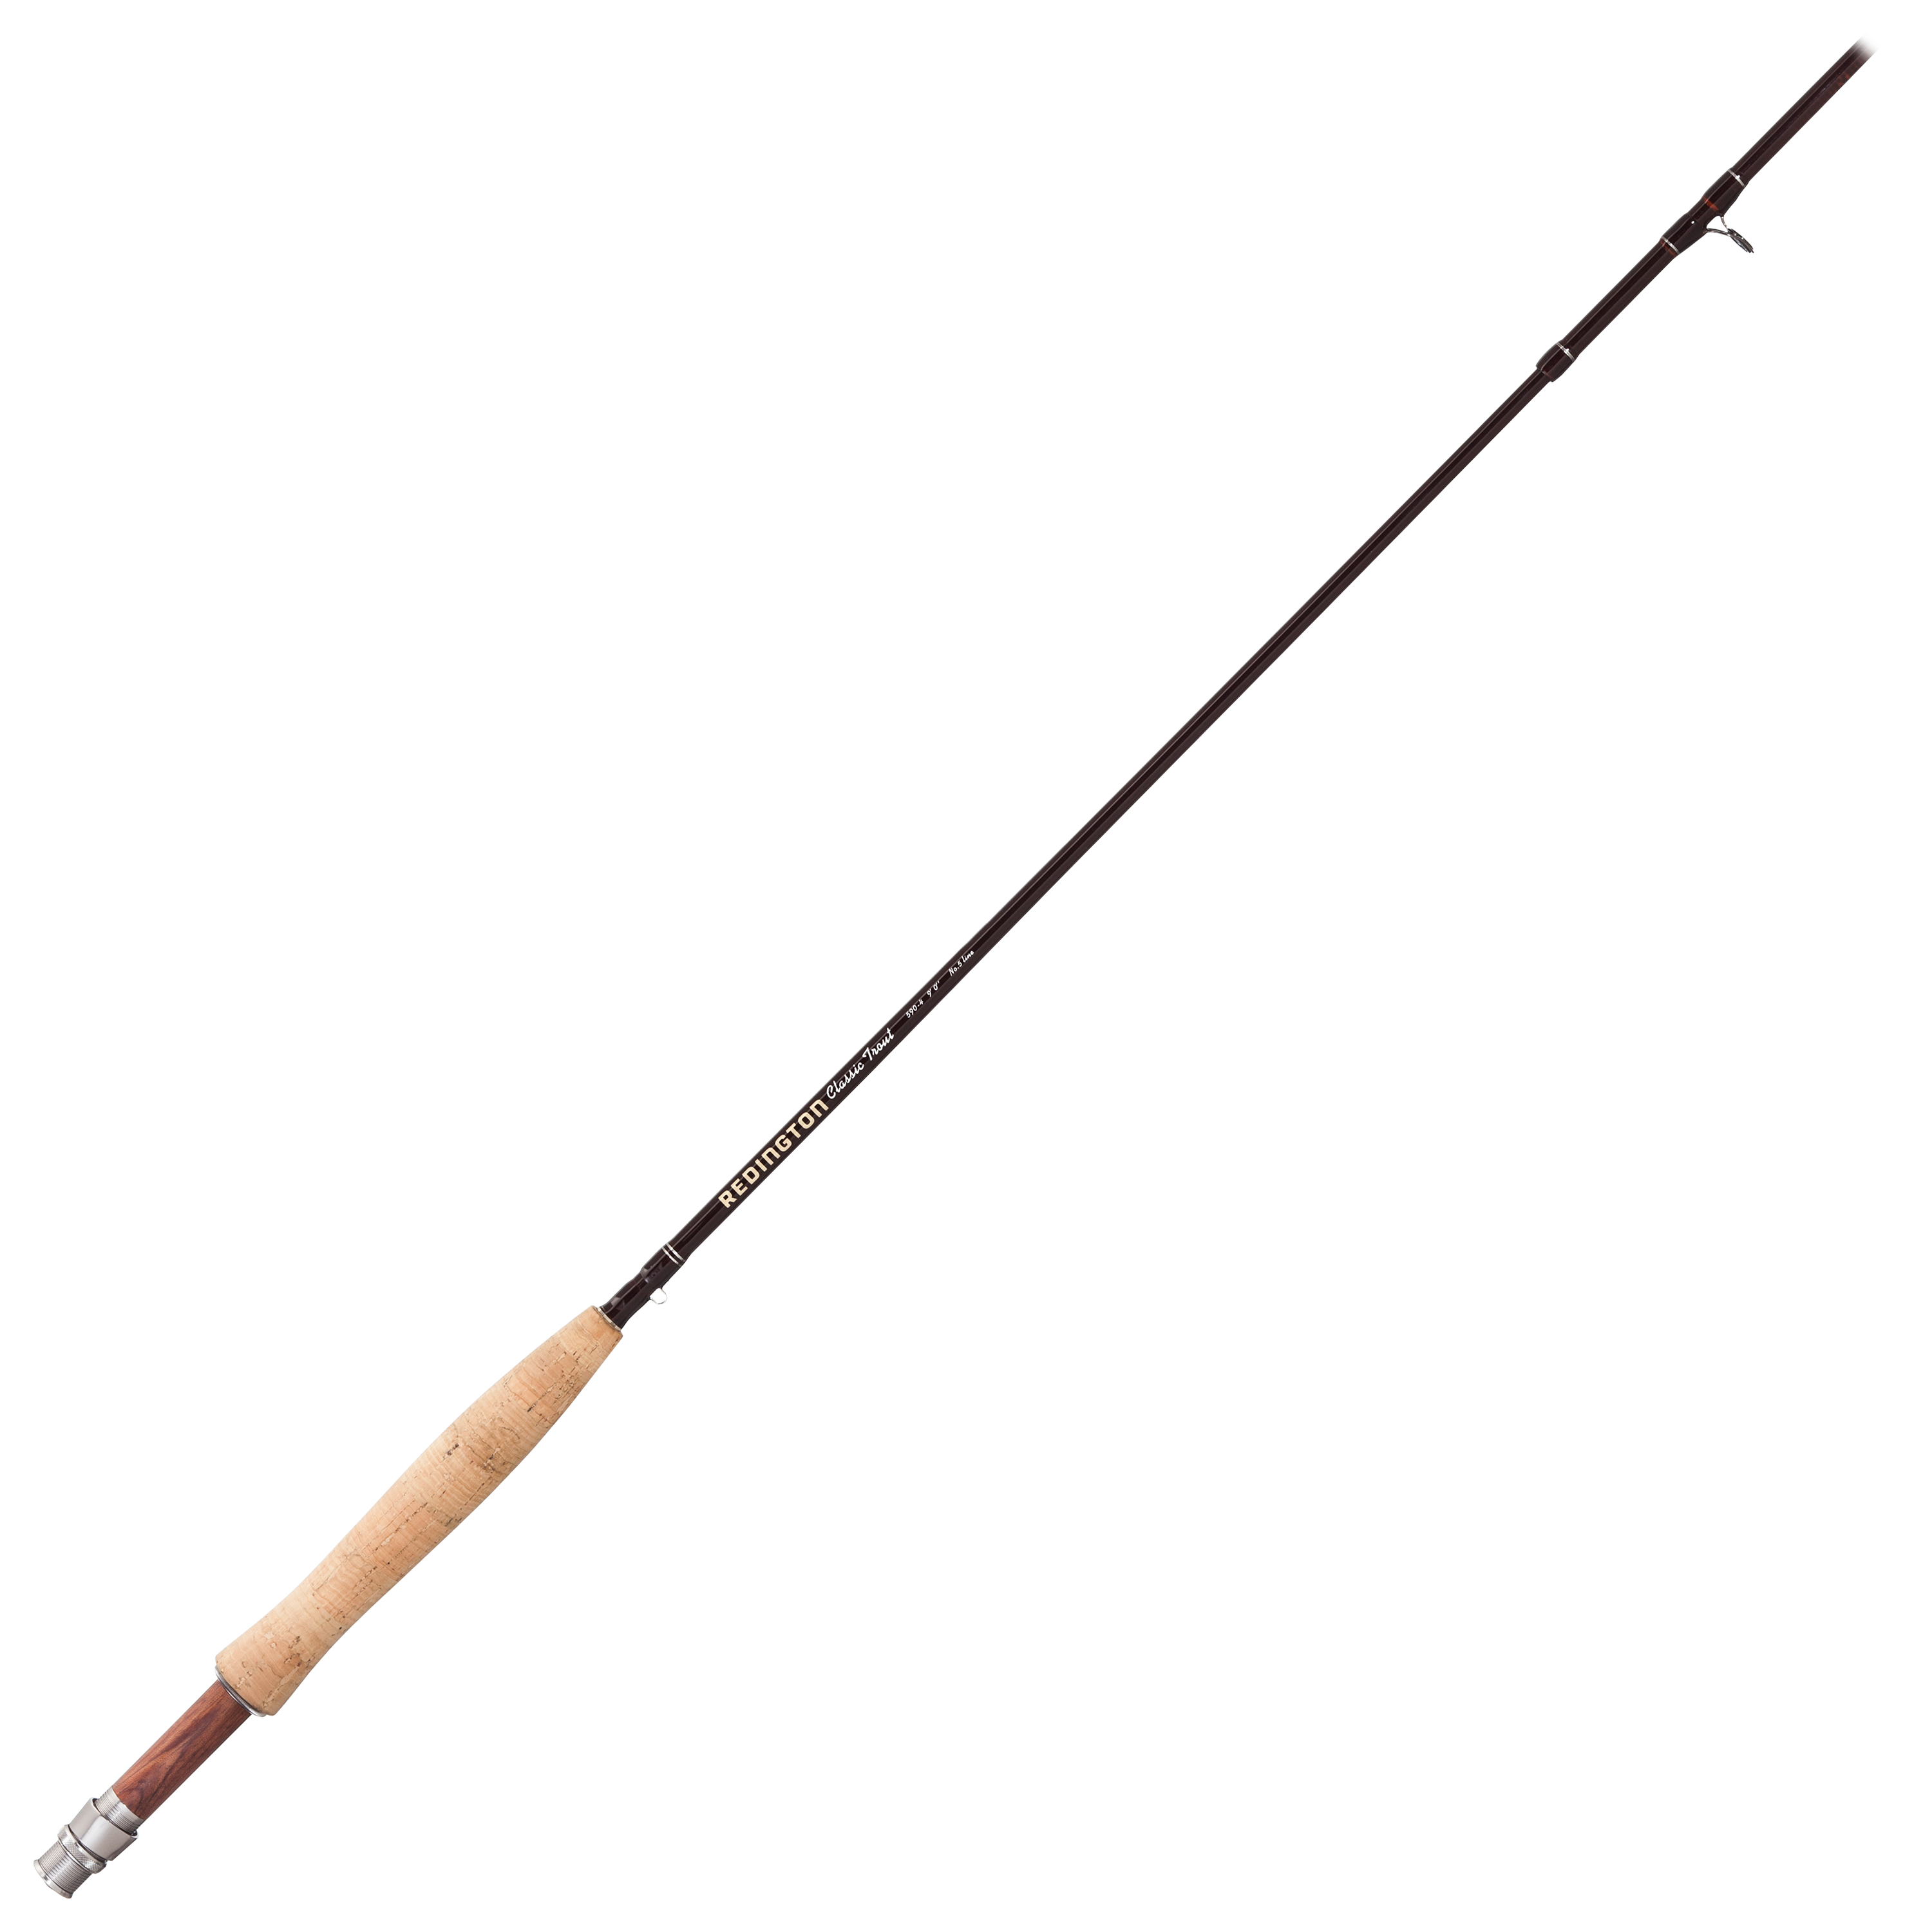 No color enhancements. TOAD 7'6” 4 weight show rod with genuine